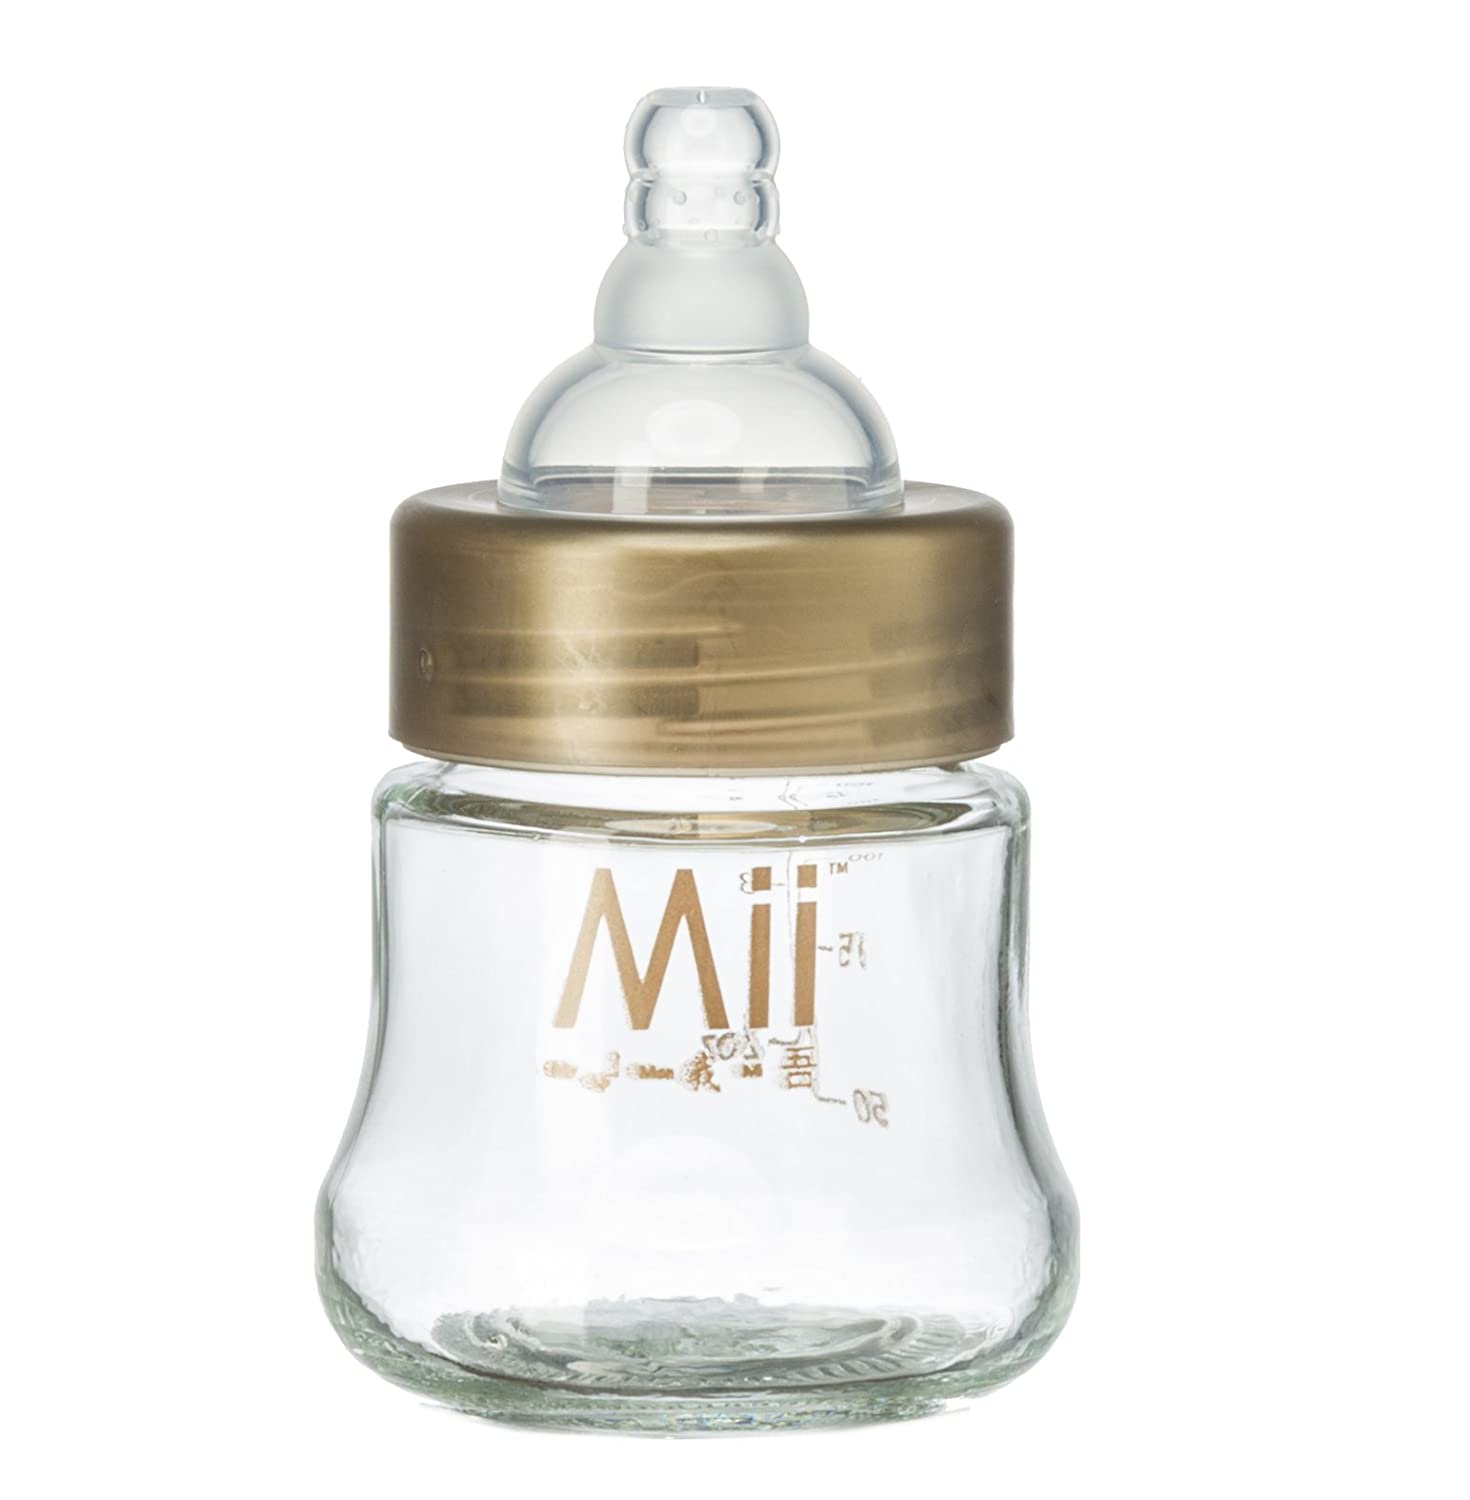 Top 6 Best Glass Baby Bottles Reviews in 2023 1